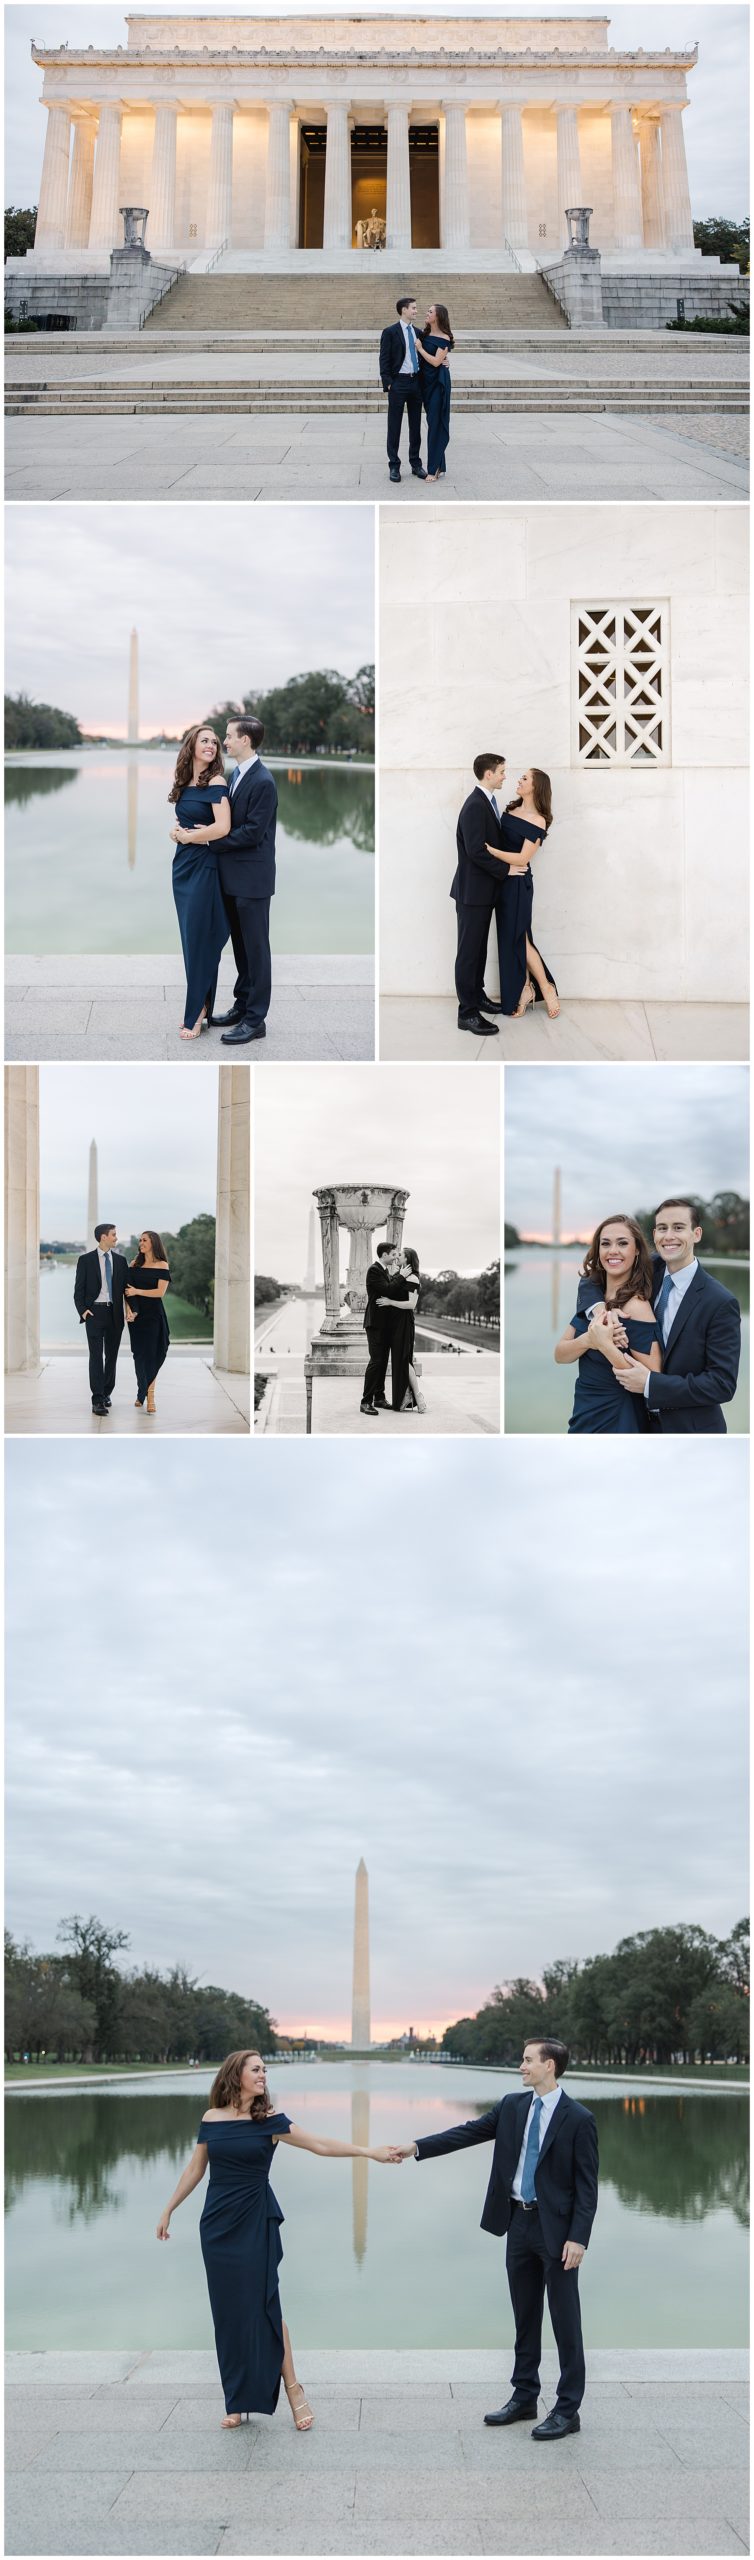 Lincoln memorial engagement photographer